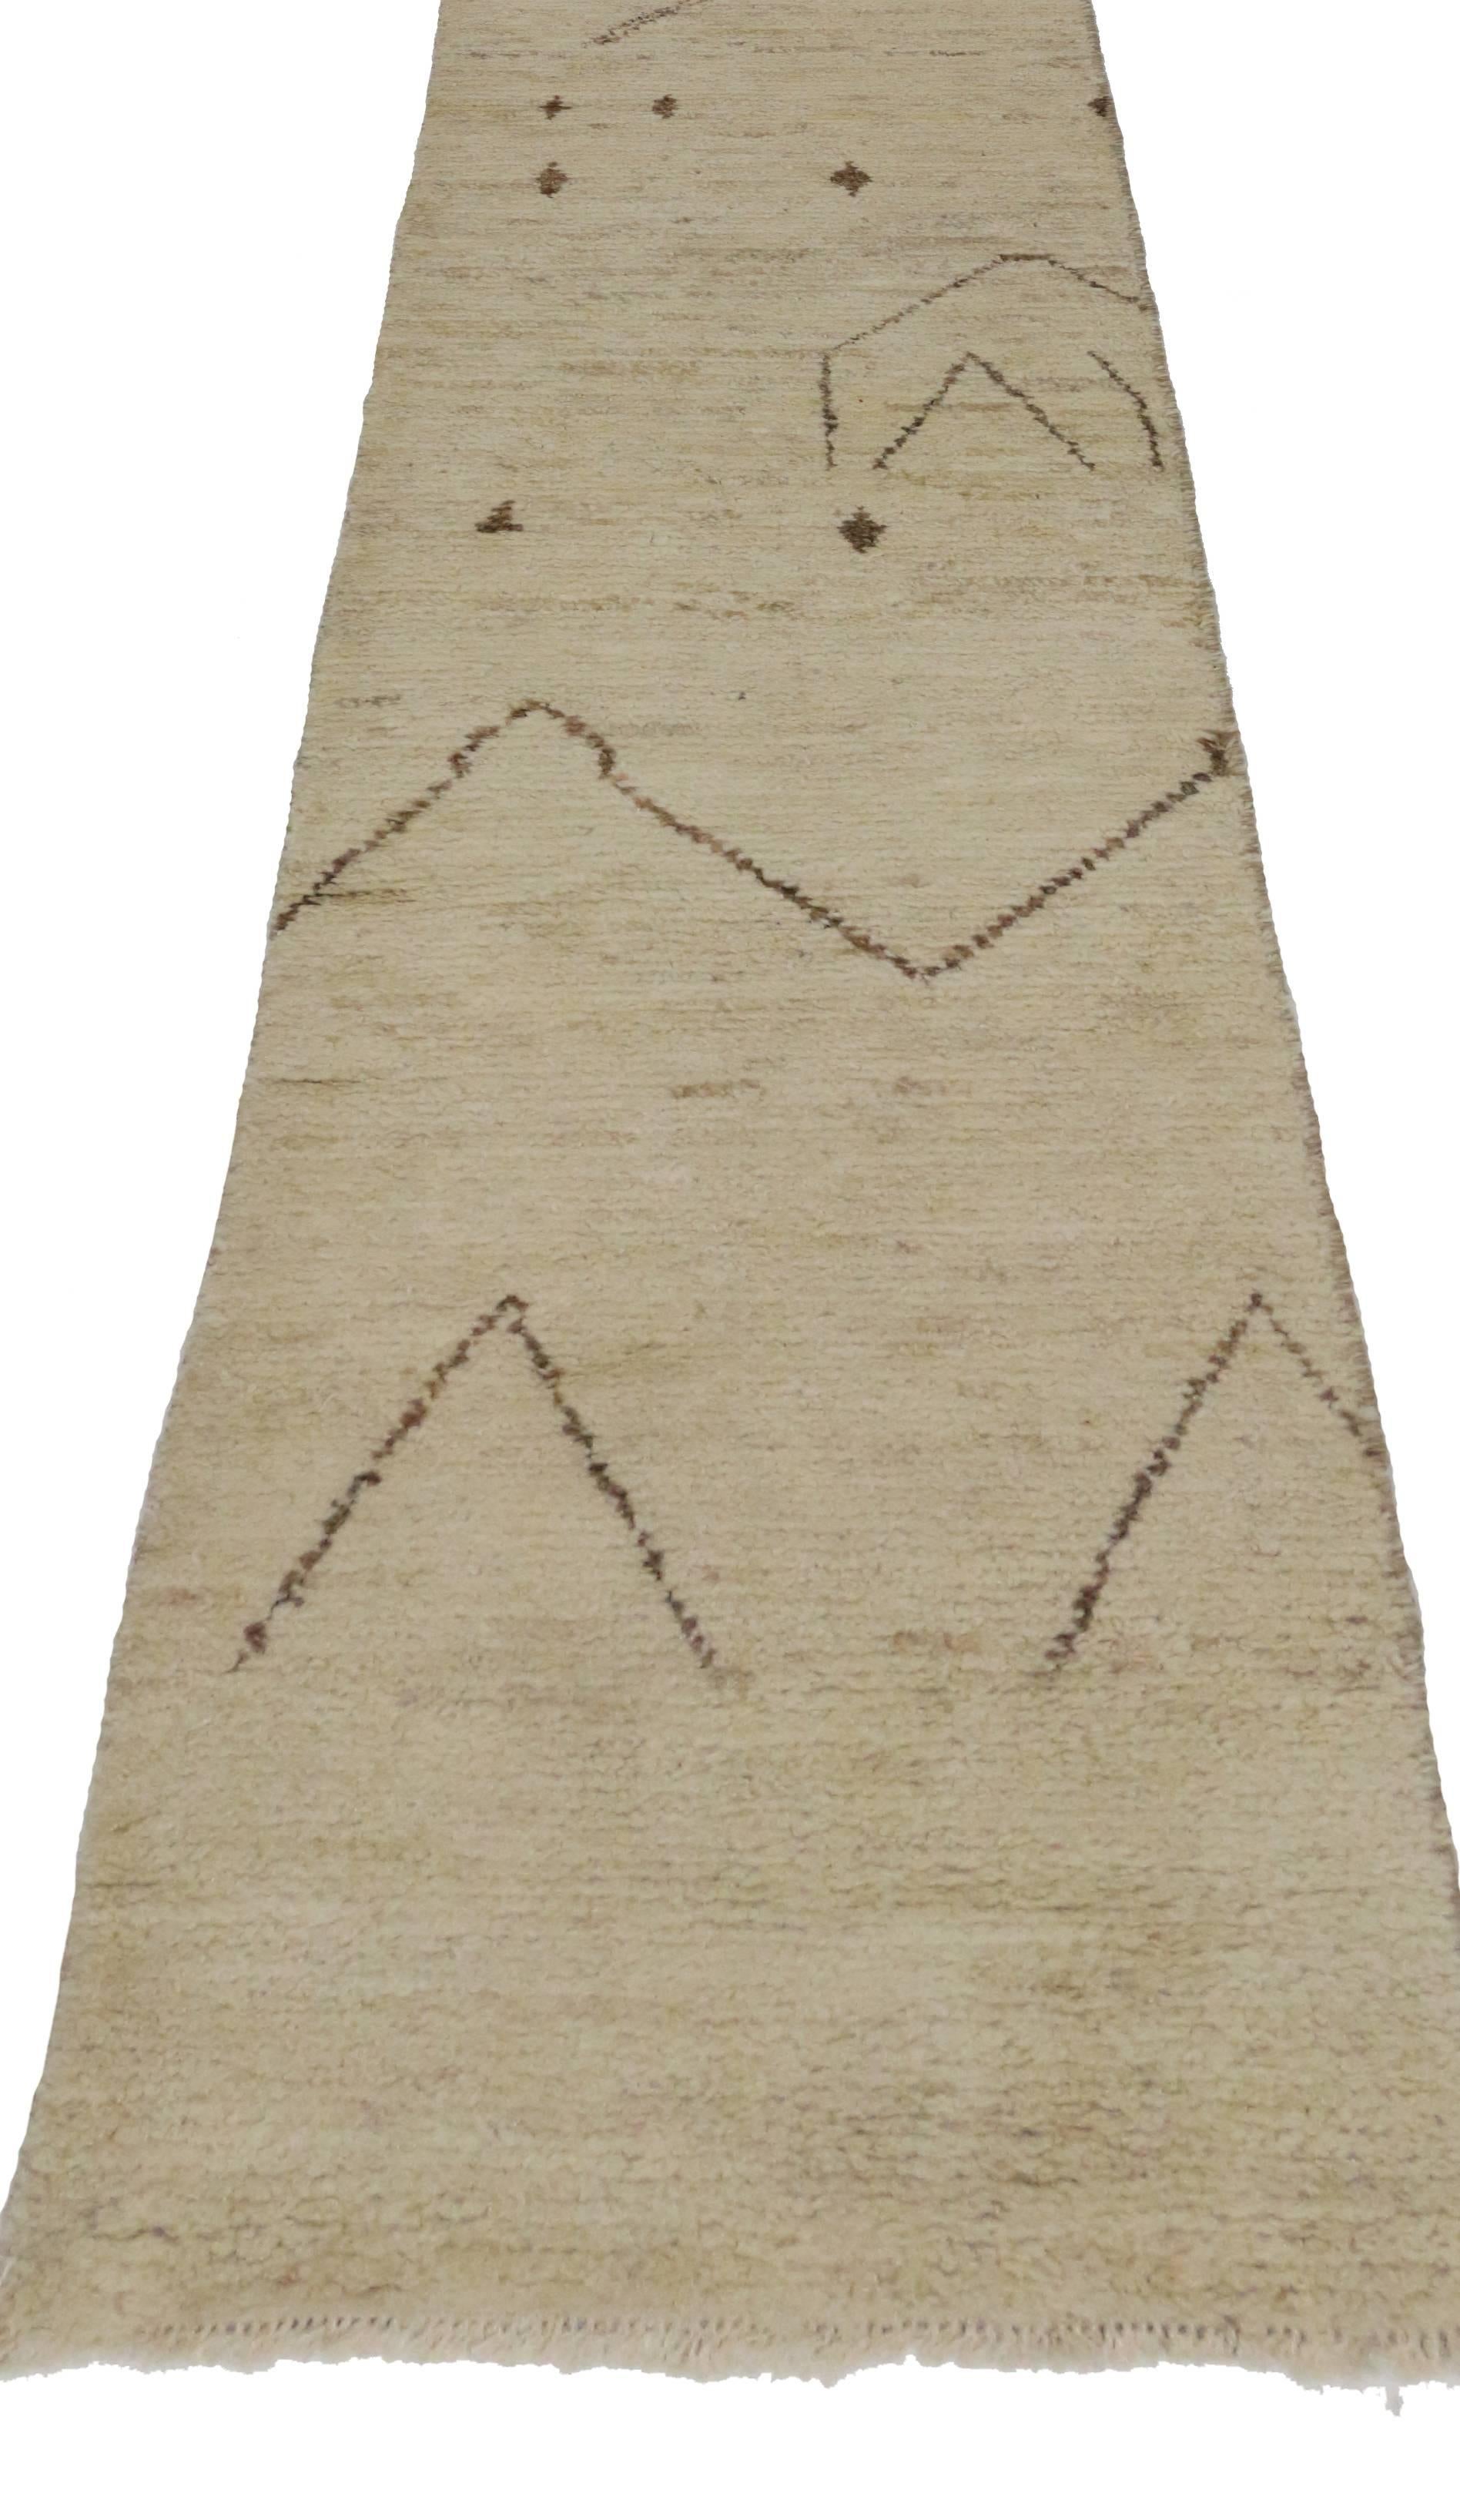 Representing a stylish union of Mid-Century Modern and Tribal Chic, this contemporary Moroccan runner features boho chic style and warm neutral colors. Highlighting its Primitive charm, the tribal designs are culturally significant. The symbols are